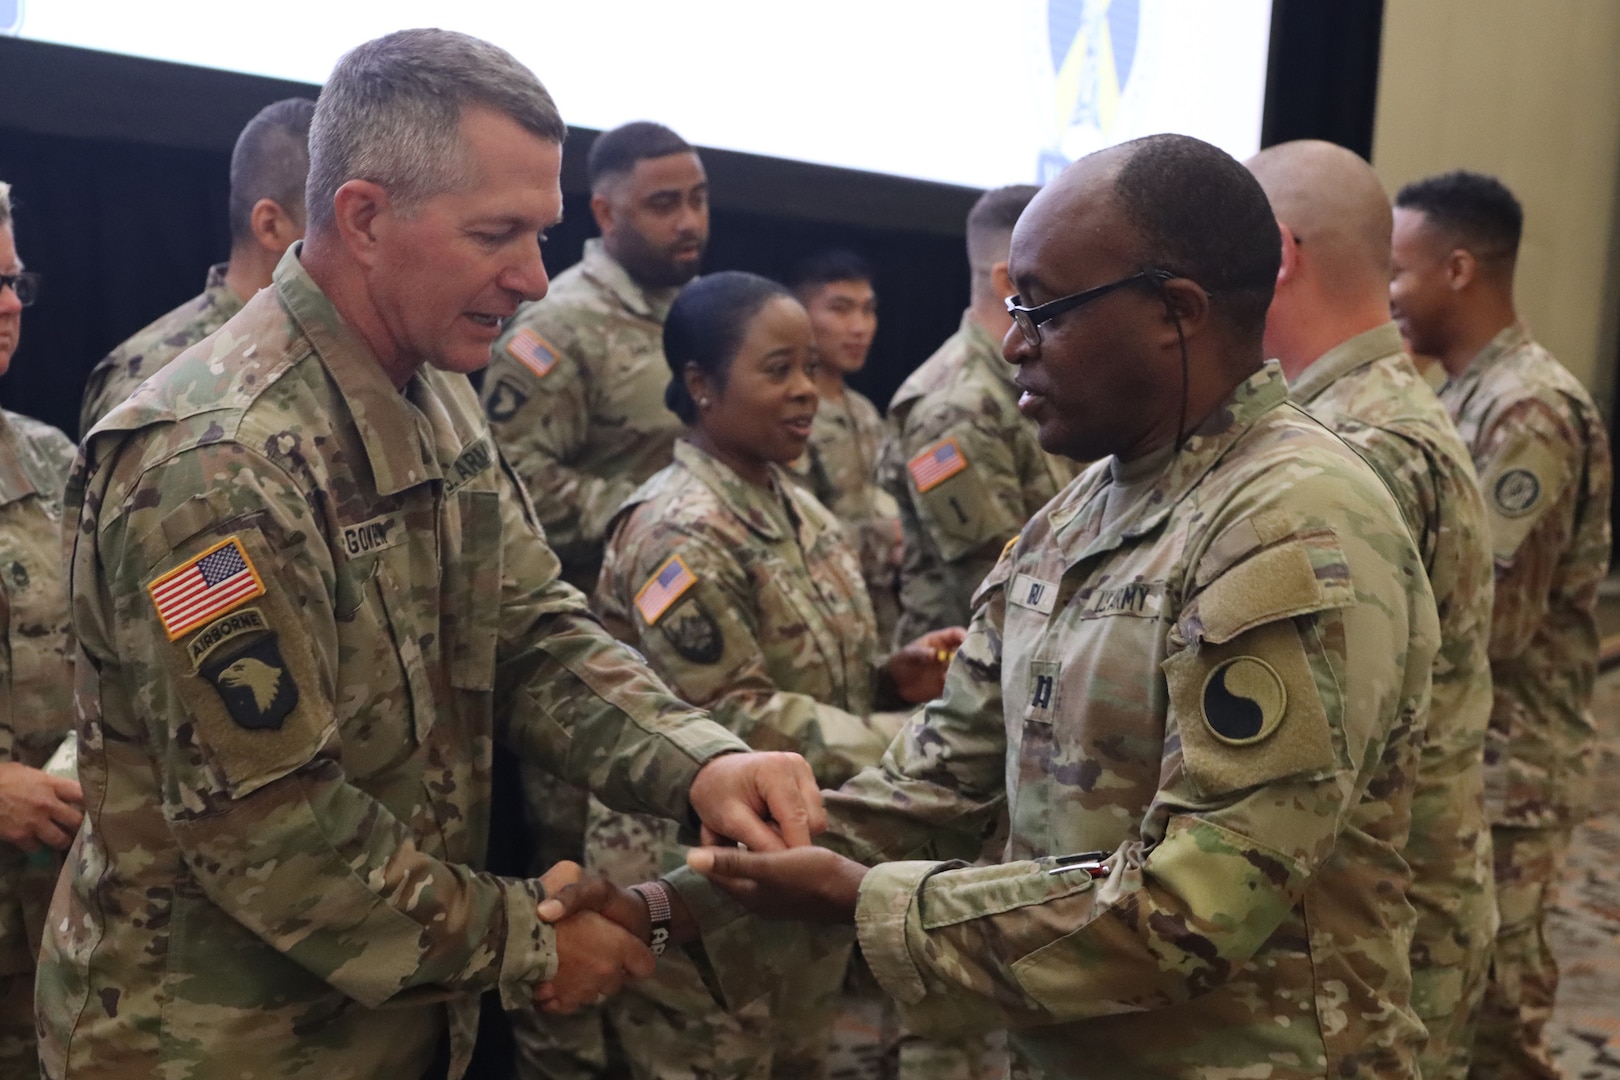 29th ID Soldiers from Maryland, Virginia recognized for overseas deployment